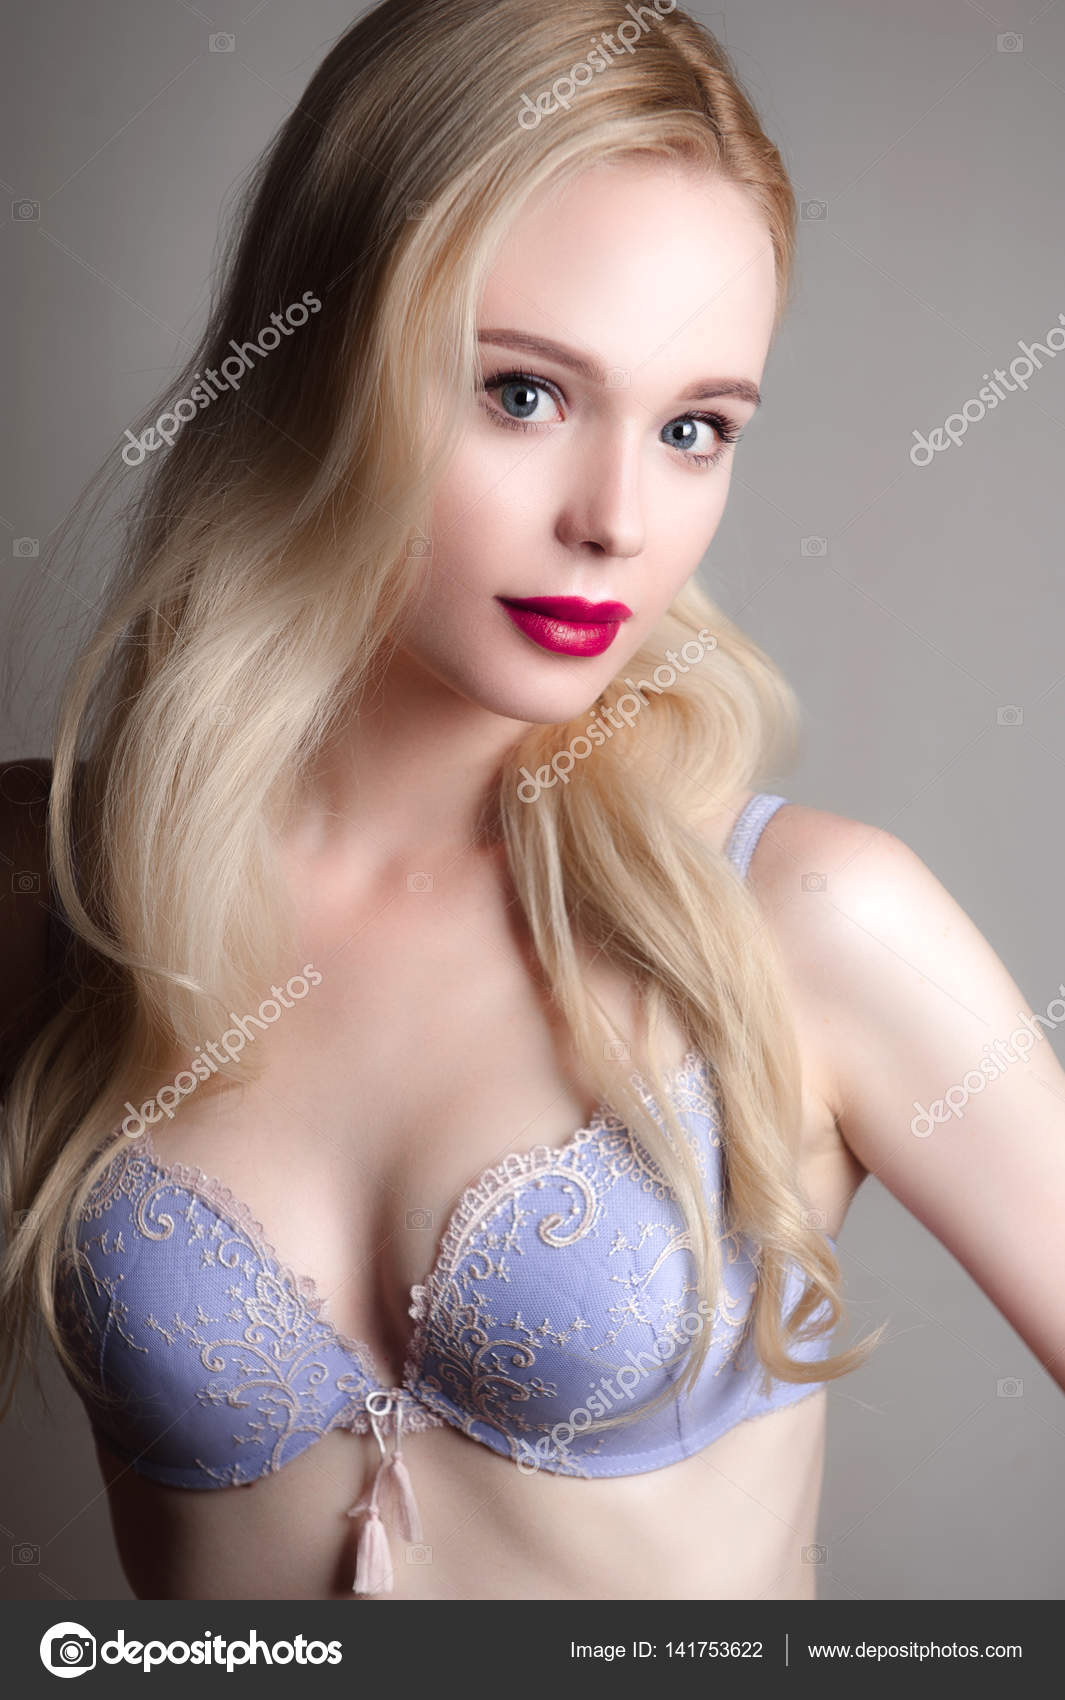 Beauty Model Girl With Perfect Make Up Red Lips And Blue